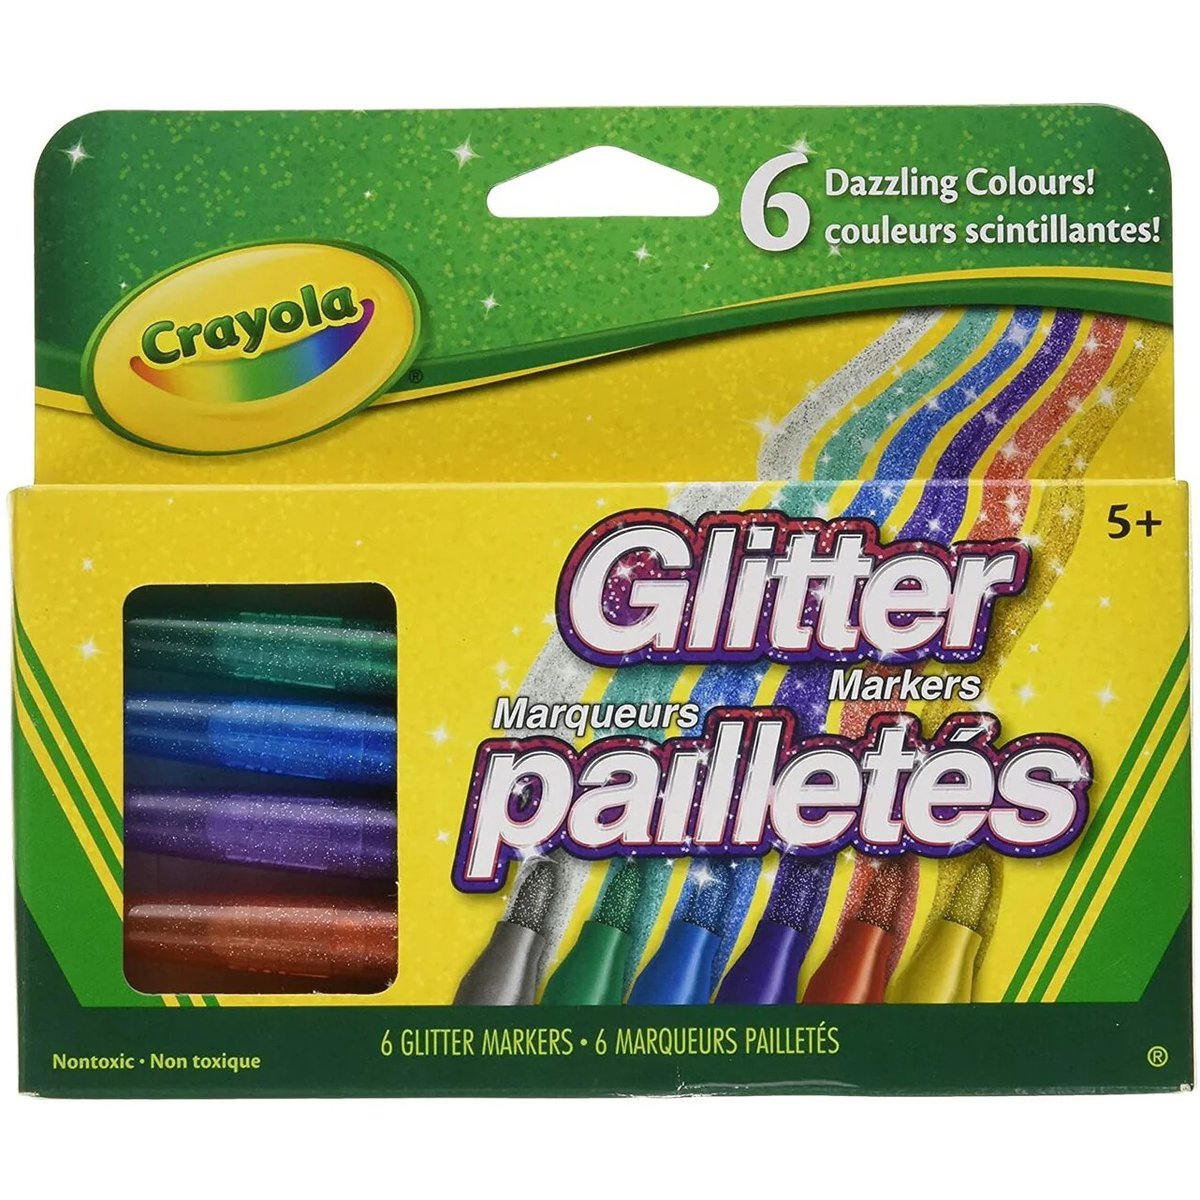 JR.WHITE Glitter Metallic Paint Pens: Sparkle Water-Based Marker Pen for  Greeting Cards, Mugs, Wood, Art Drawing, Rock Painting, Posters, Albums